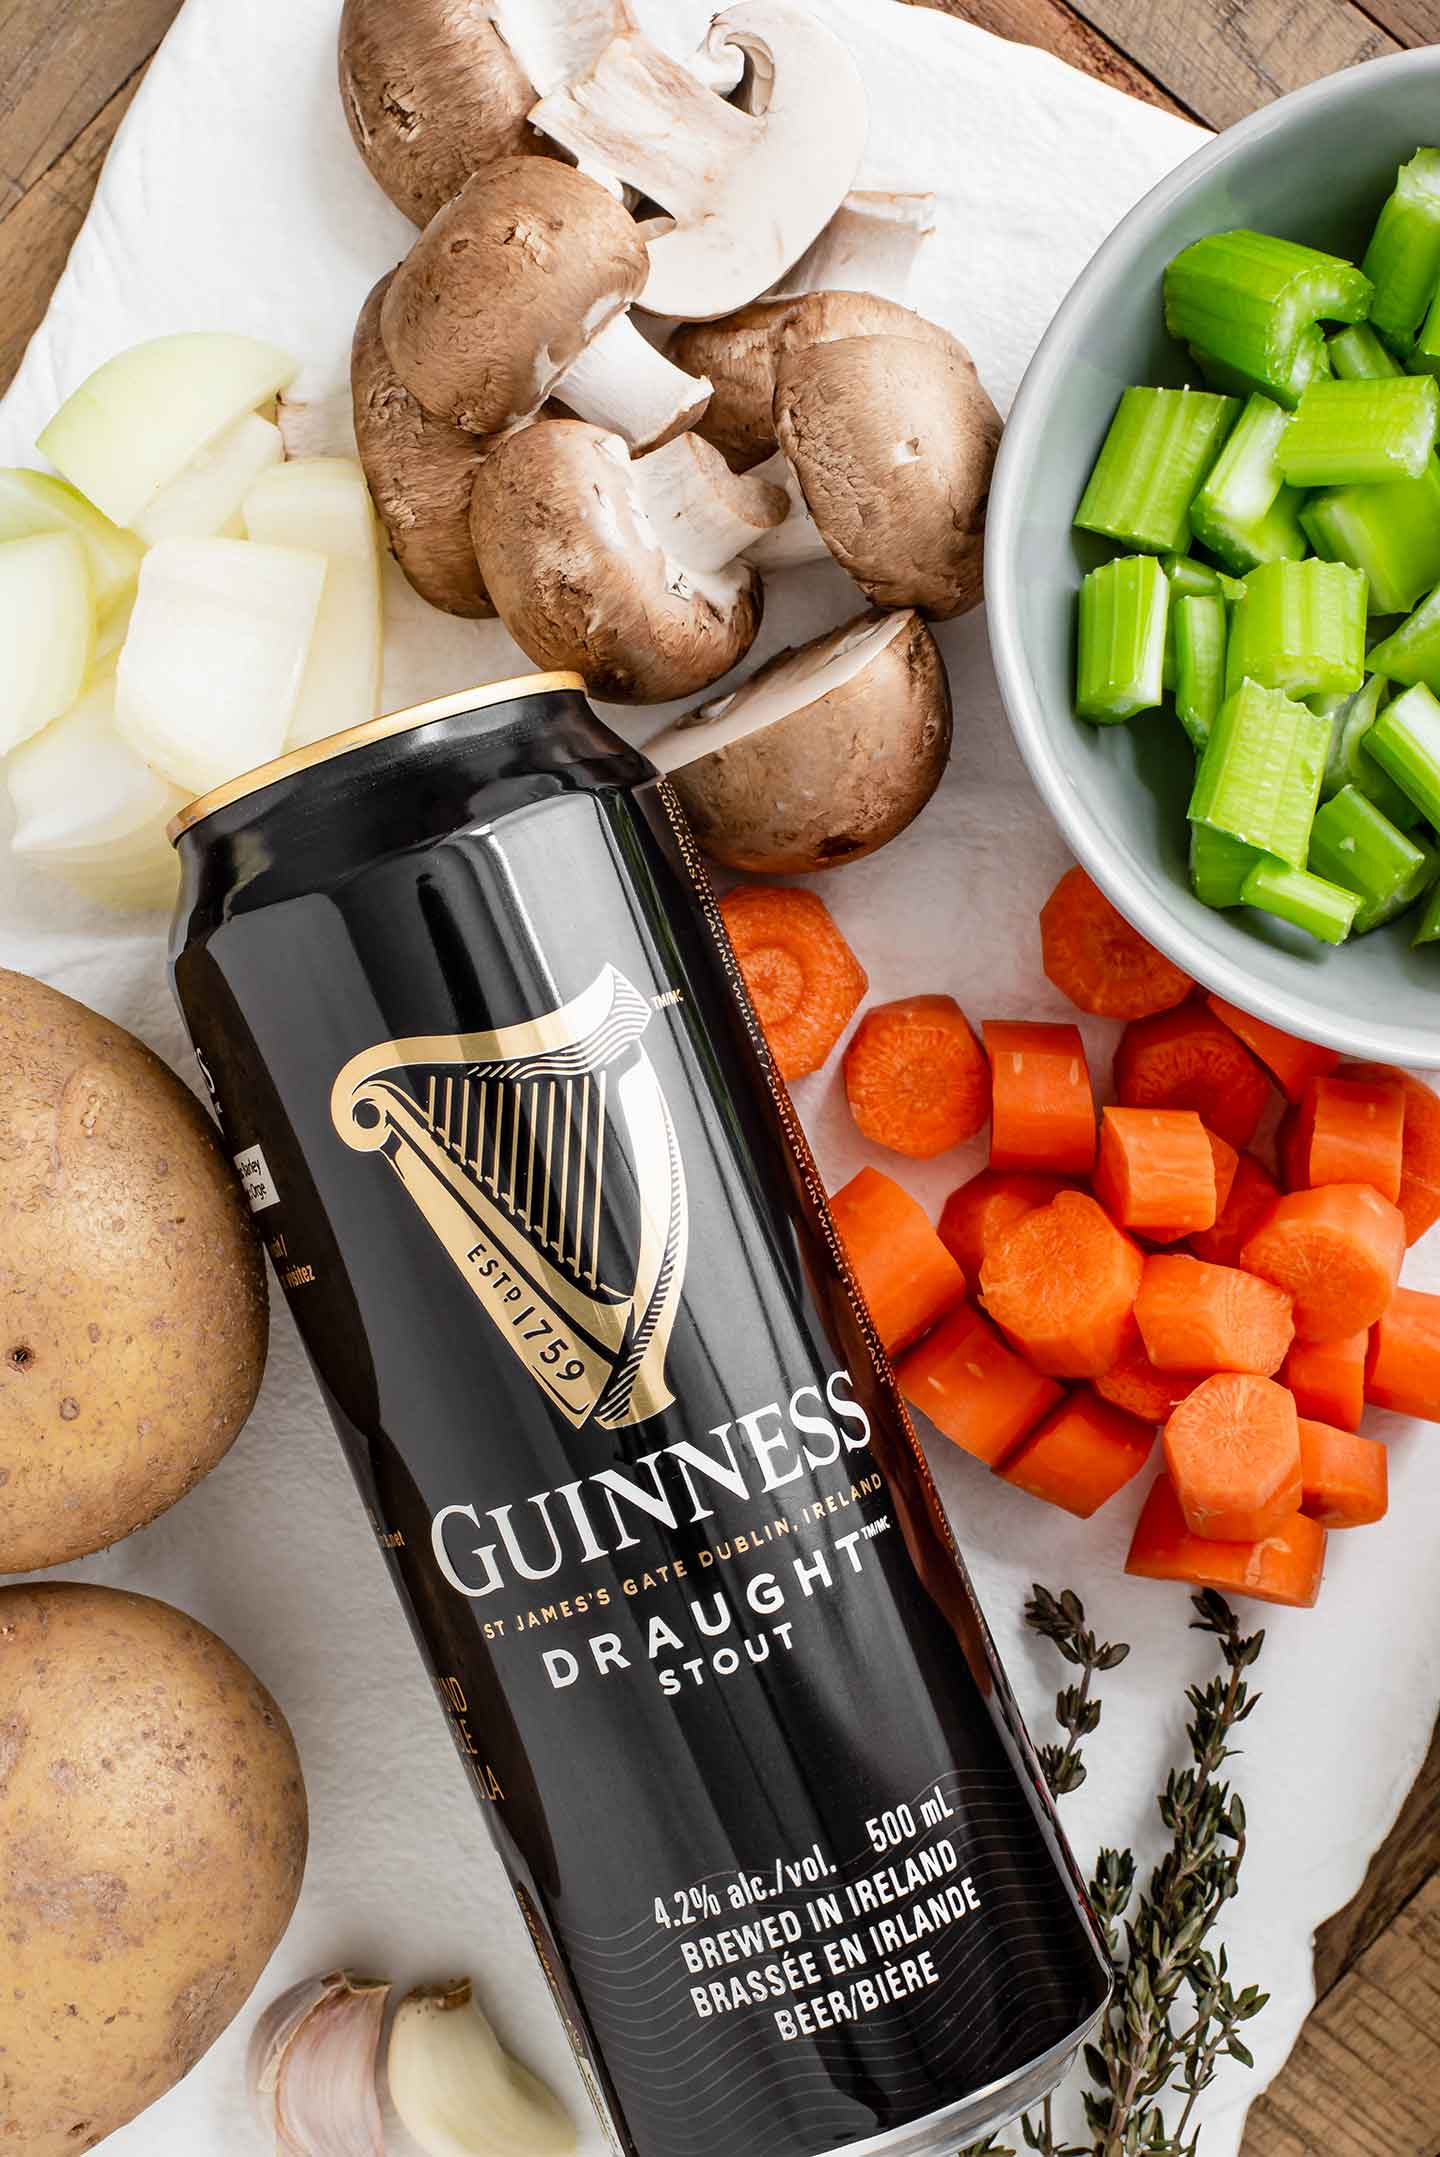 Top down view of ingredients. A can of Guinness stout is surrounded by carrots, celery, mushrooms, onion, potatoes, garlic and fresh thyme.